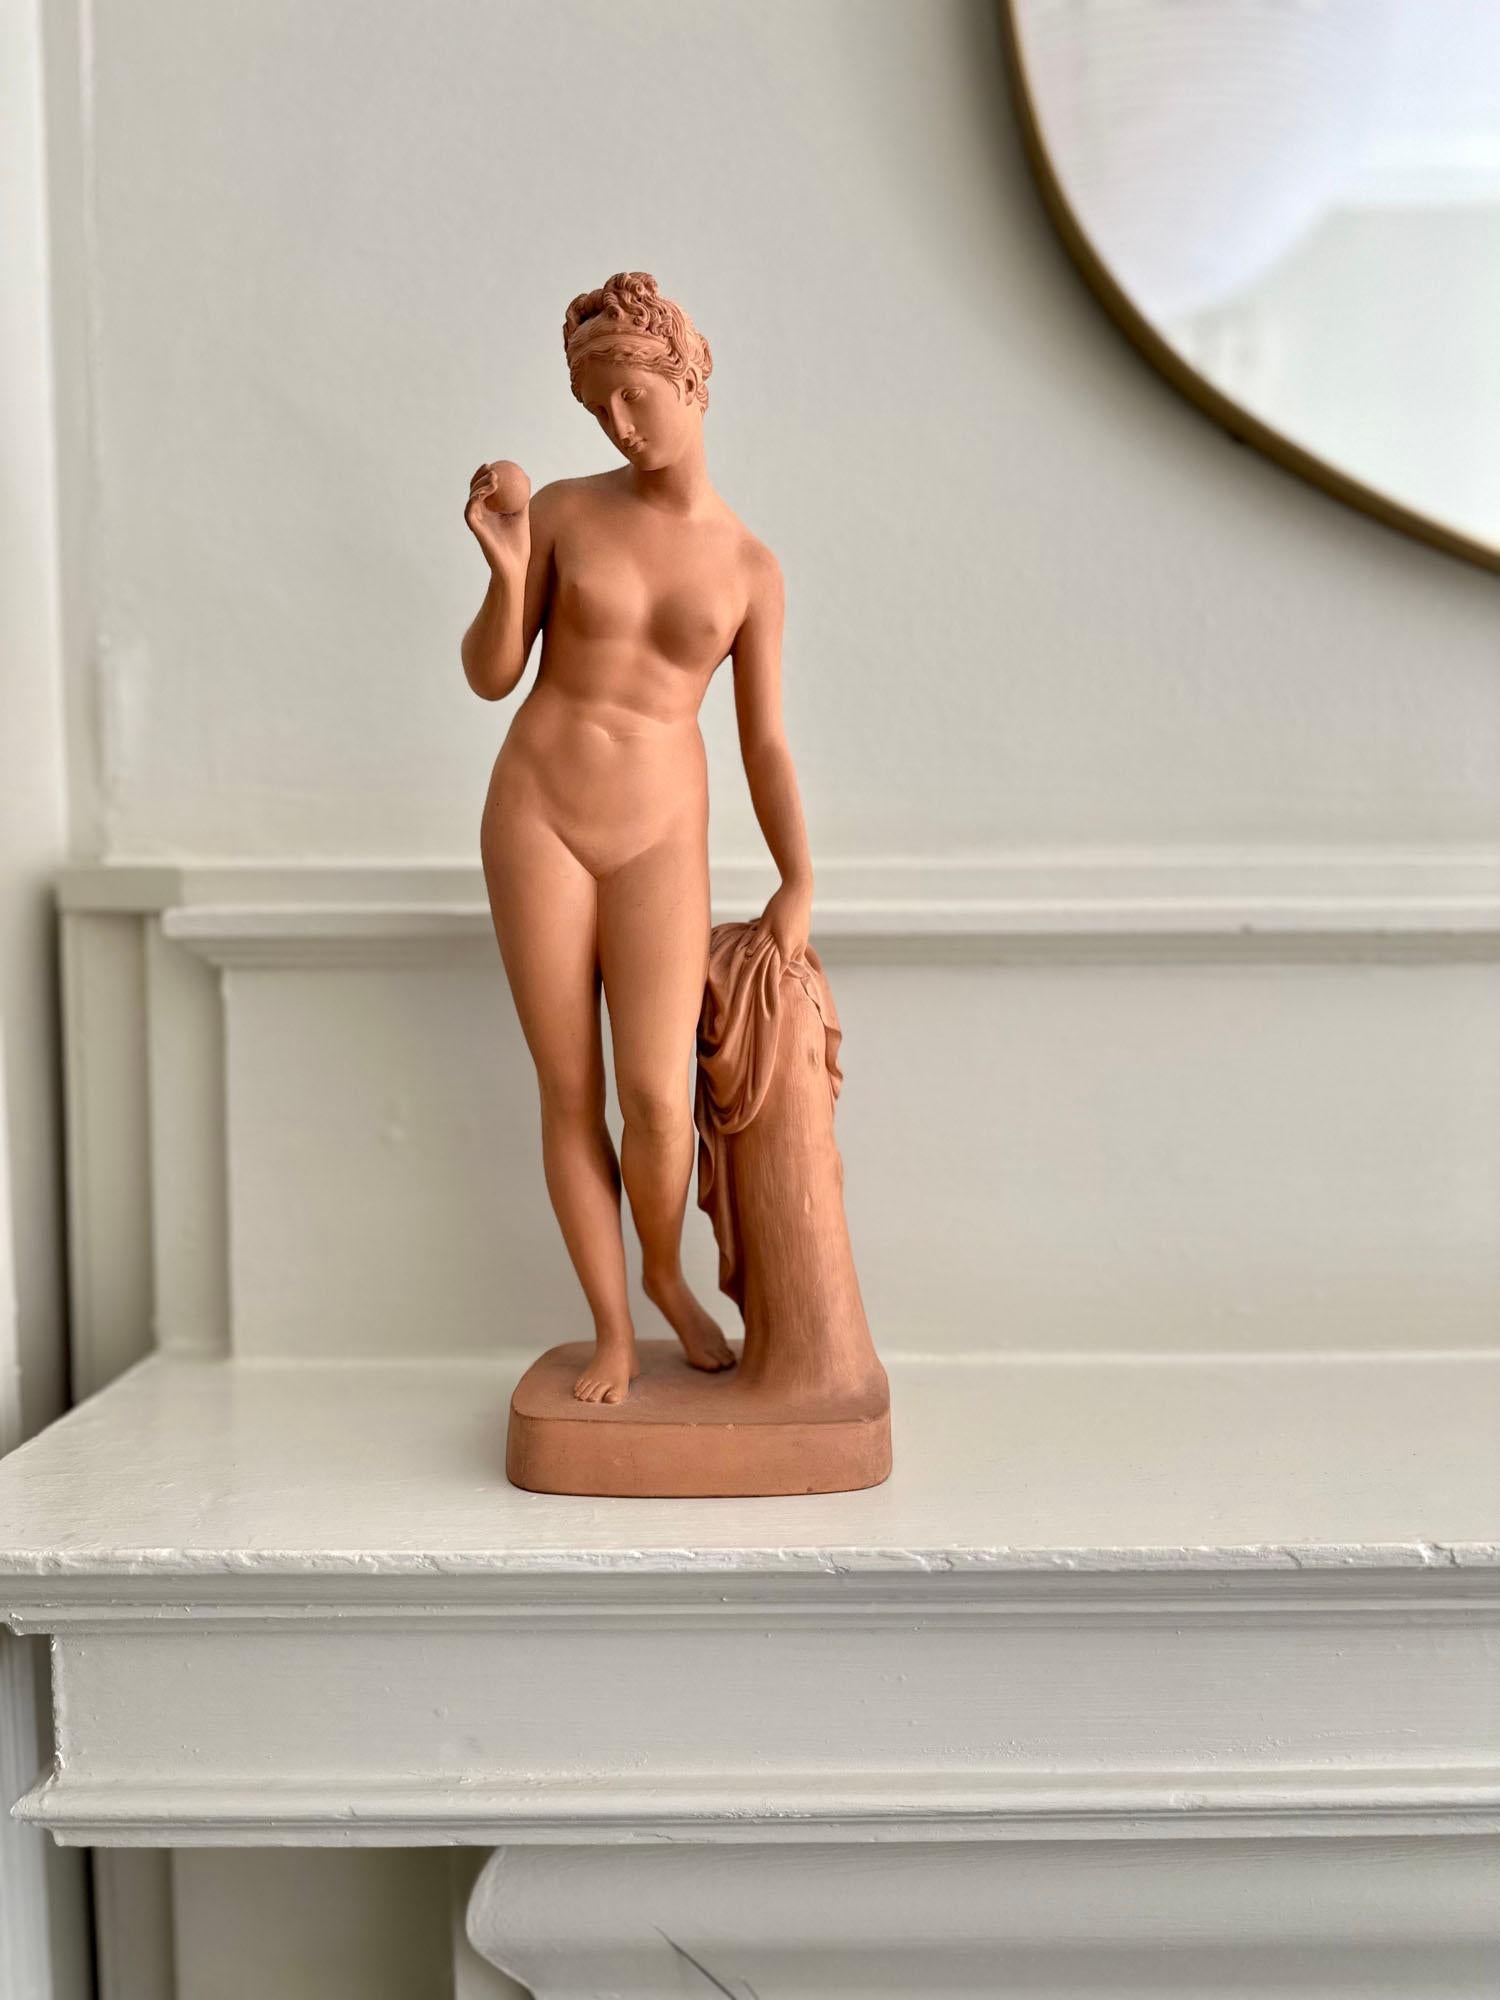 After the renowned neoclassical sculptor Bertel Thorvaldsen (Danish, 1770-1844) comes this terracotta reduction of his 